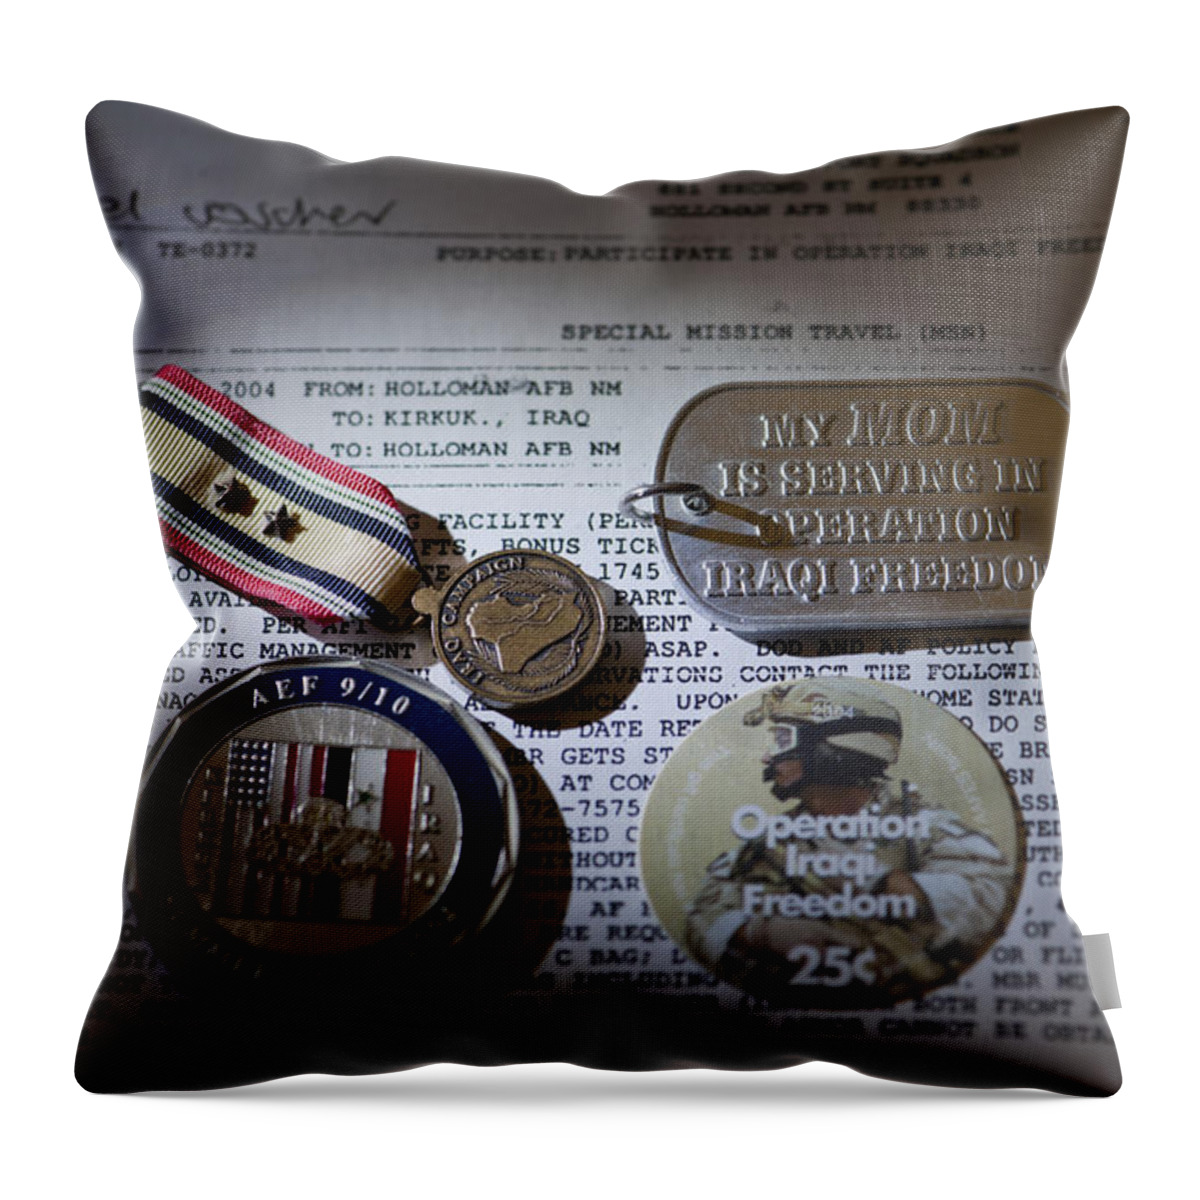 Operation Iraqi Freedom Throw Pillow featuring the photograph Memories of a Past Life by Melany Sarafis